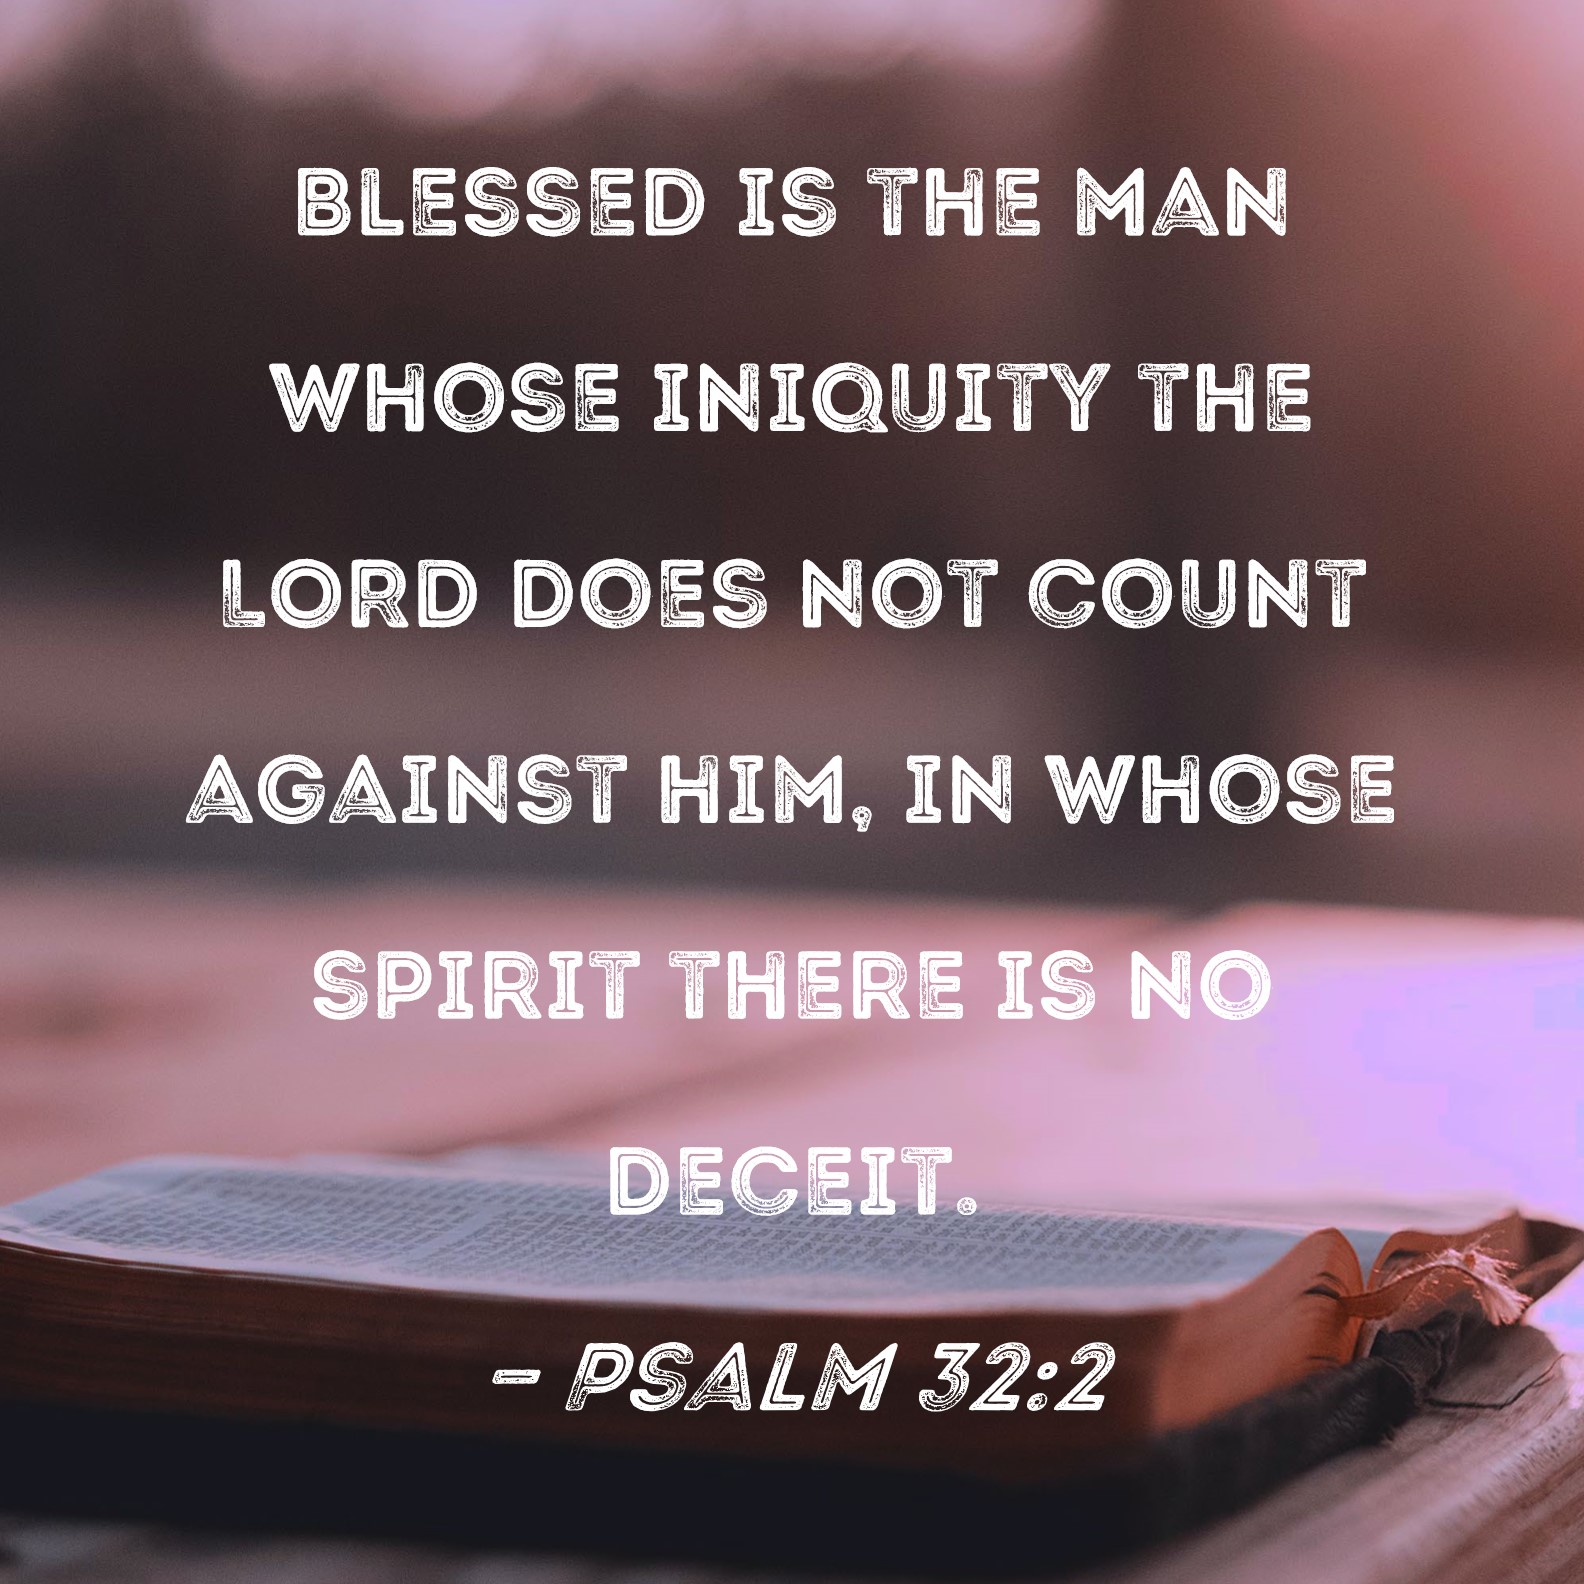 Psalm 32 2 Blessed is the man whose iniquity the LORD does not